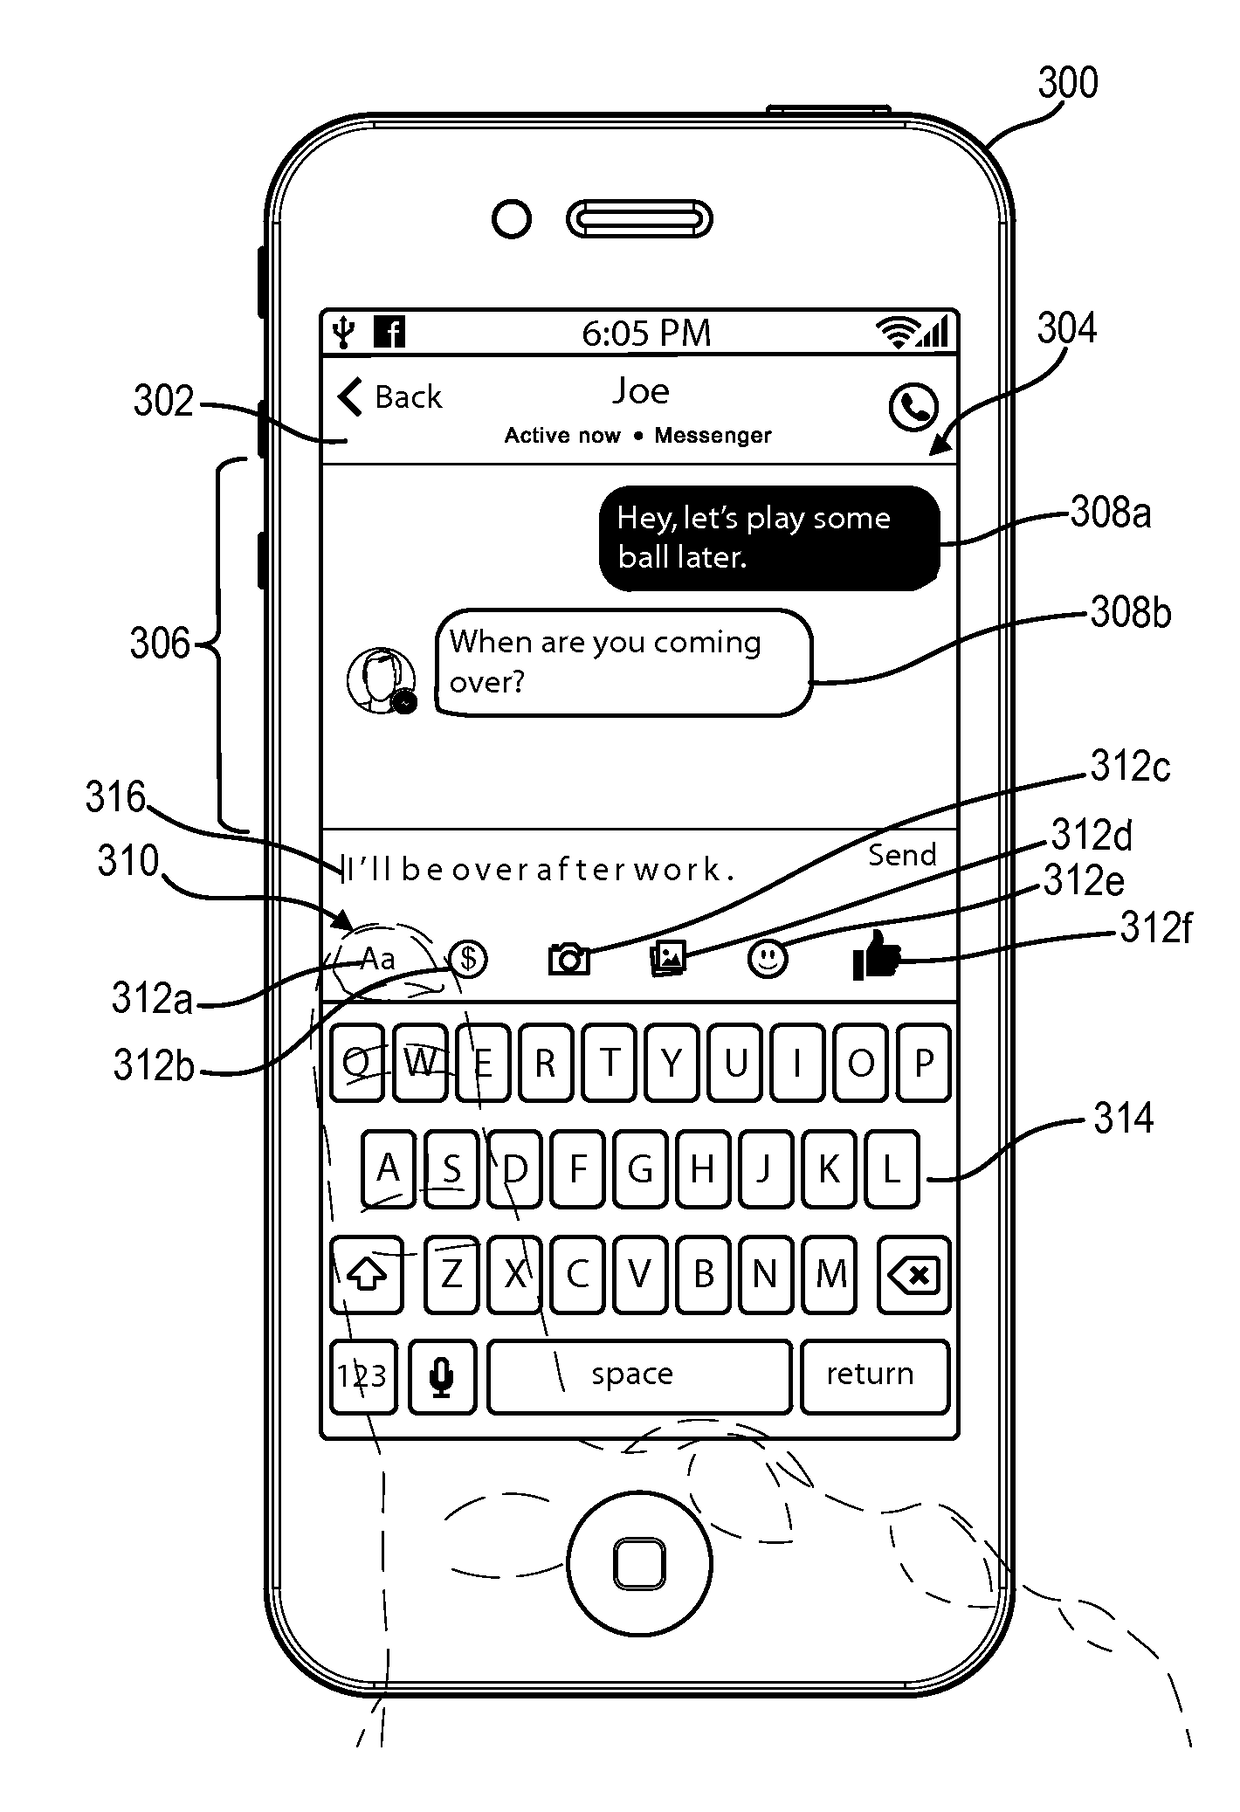 Augmenting text messages with emotion information